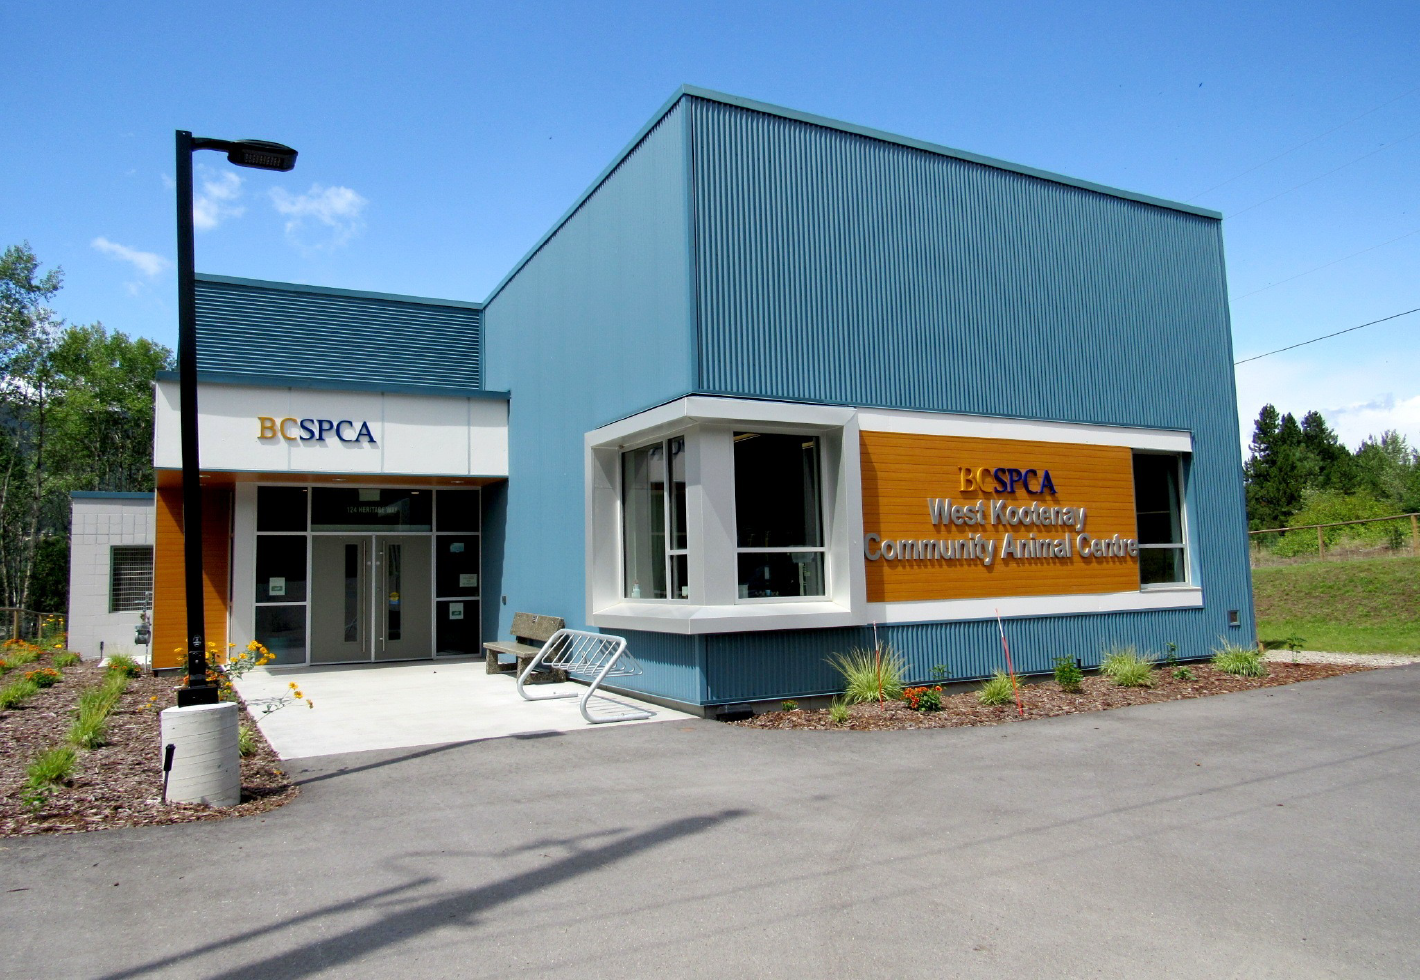 http://BCSPCA%20West%20Kootenay%20Community%20Animal%20Centre%20Electrical%20Engineering%20Project